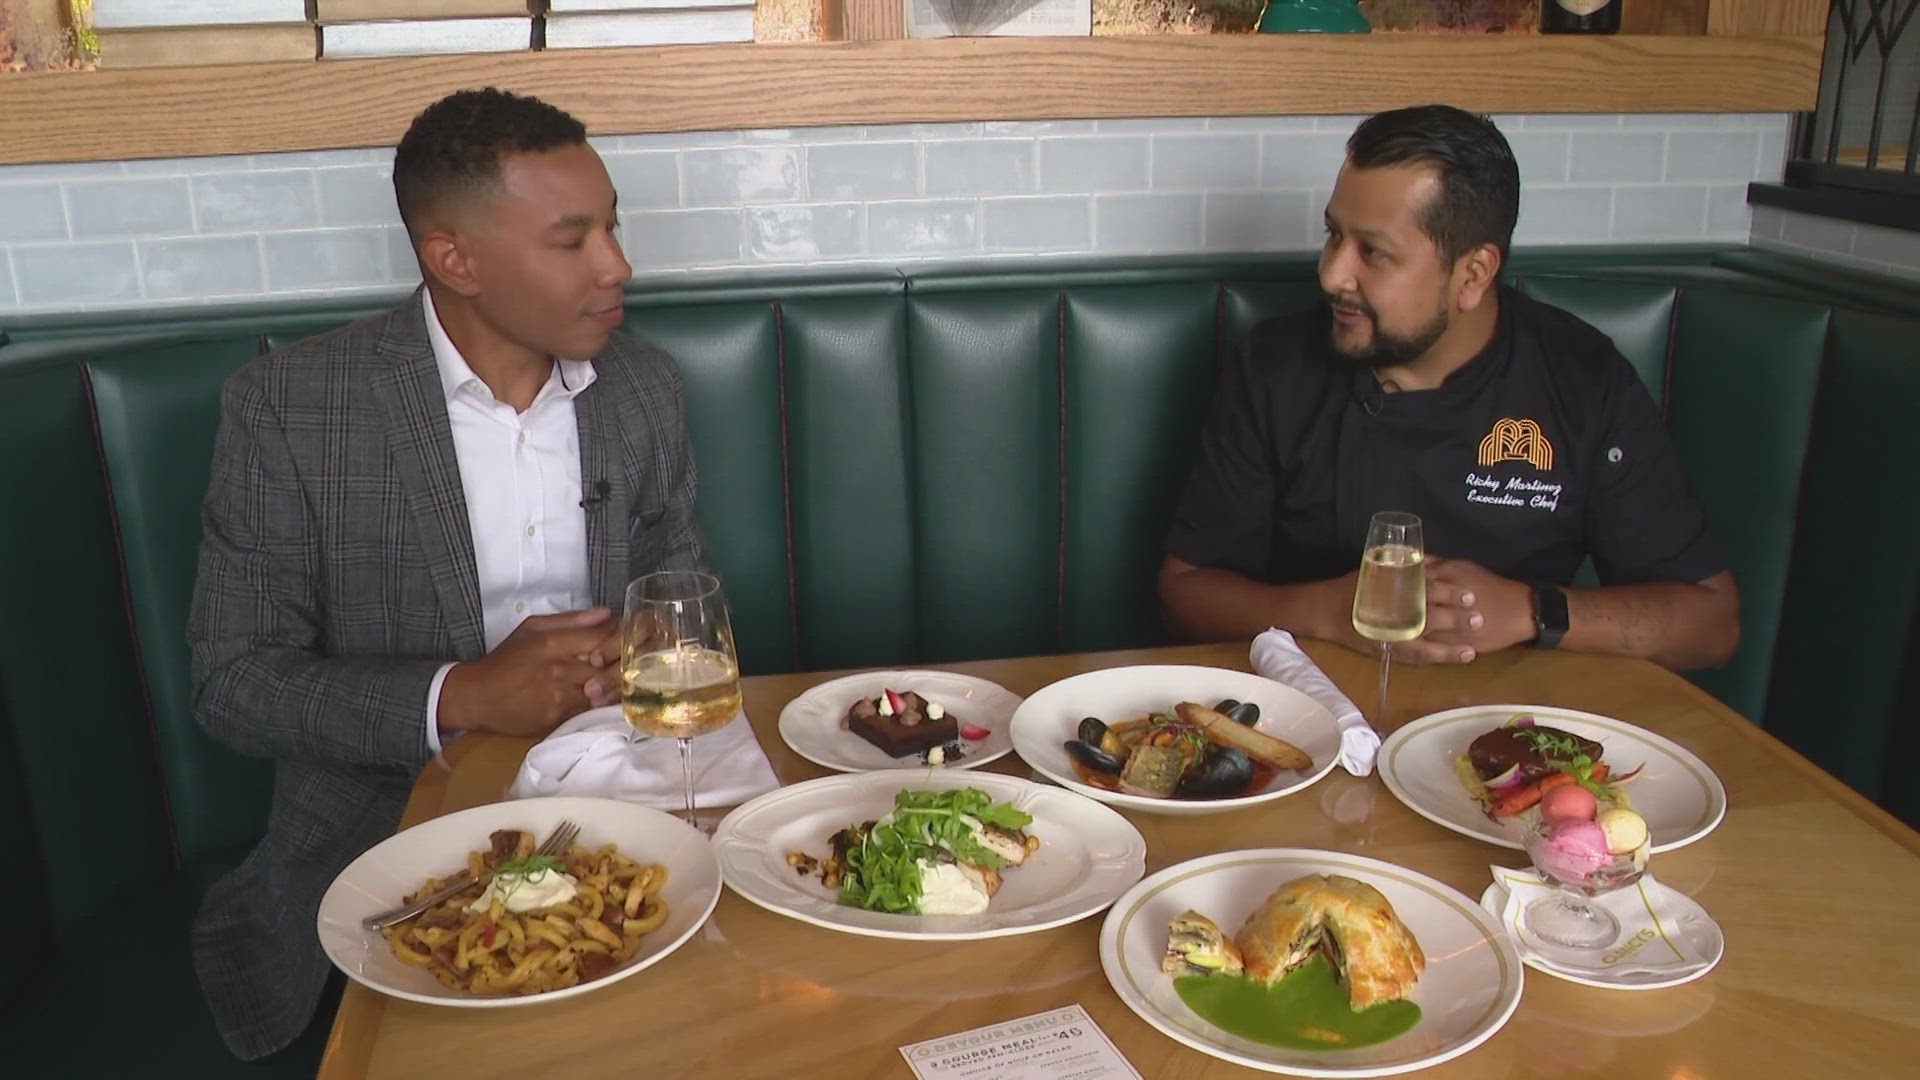 13News' Matthew Fultz spoke with a local chef who is taking part about what you can expect.